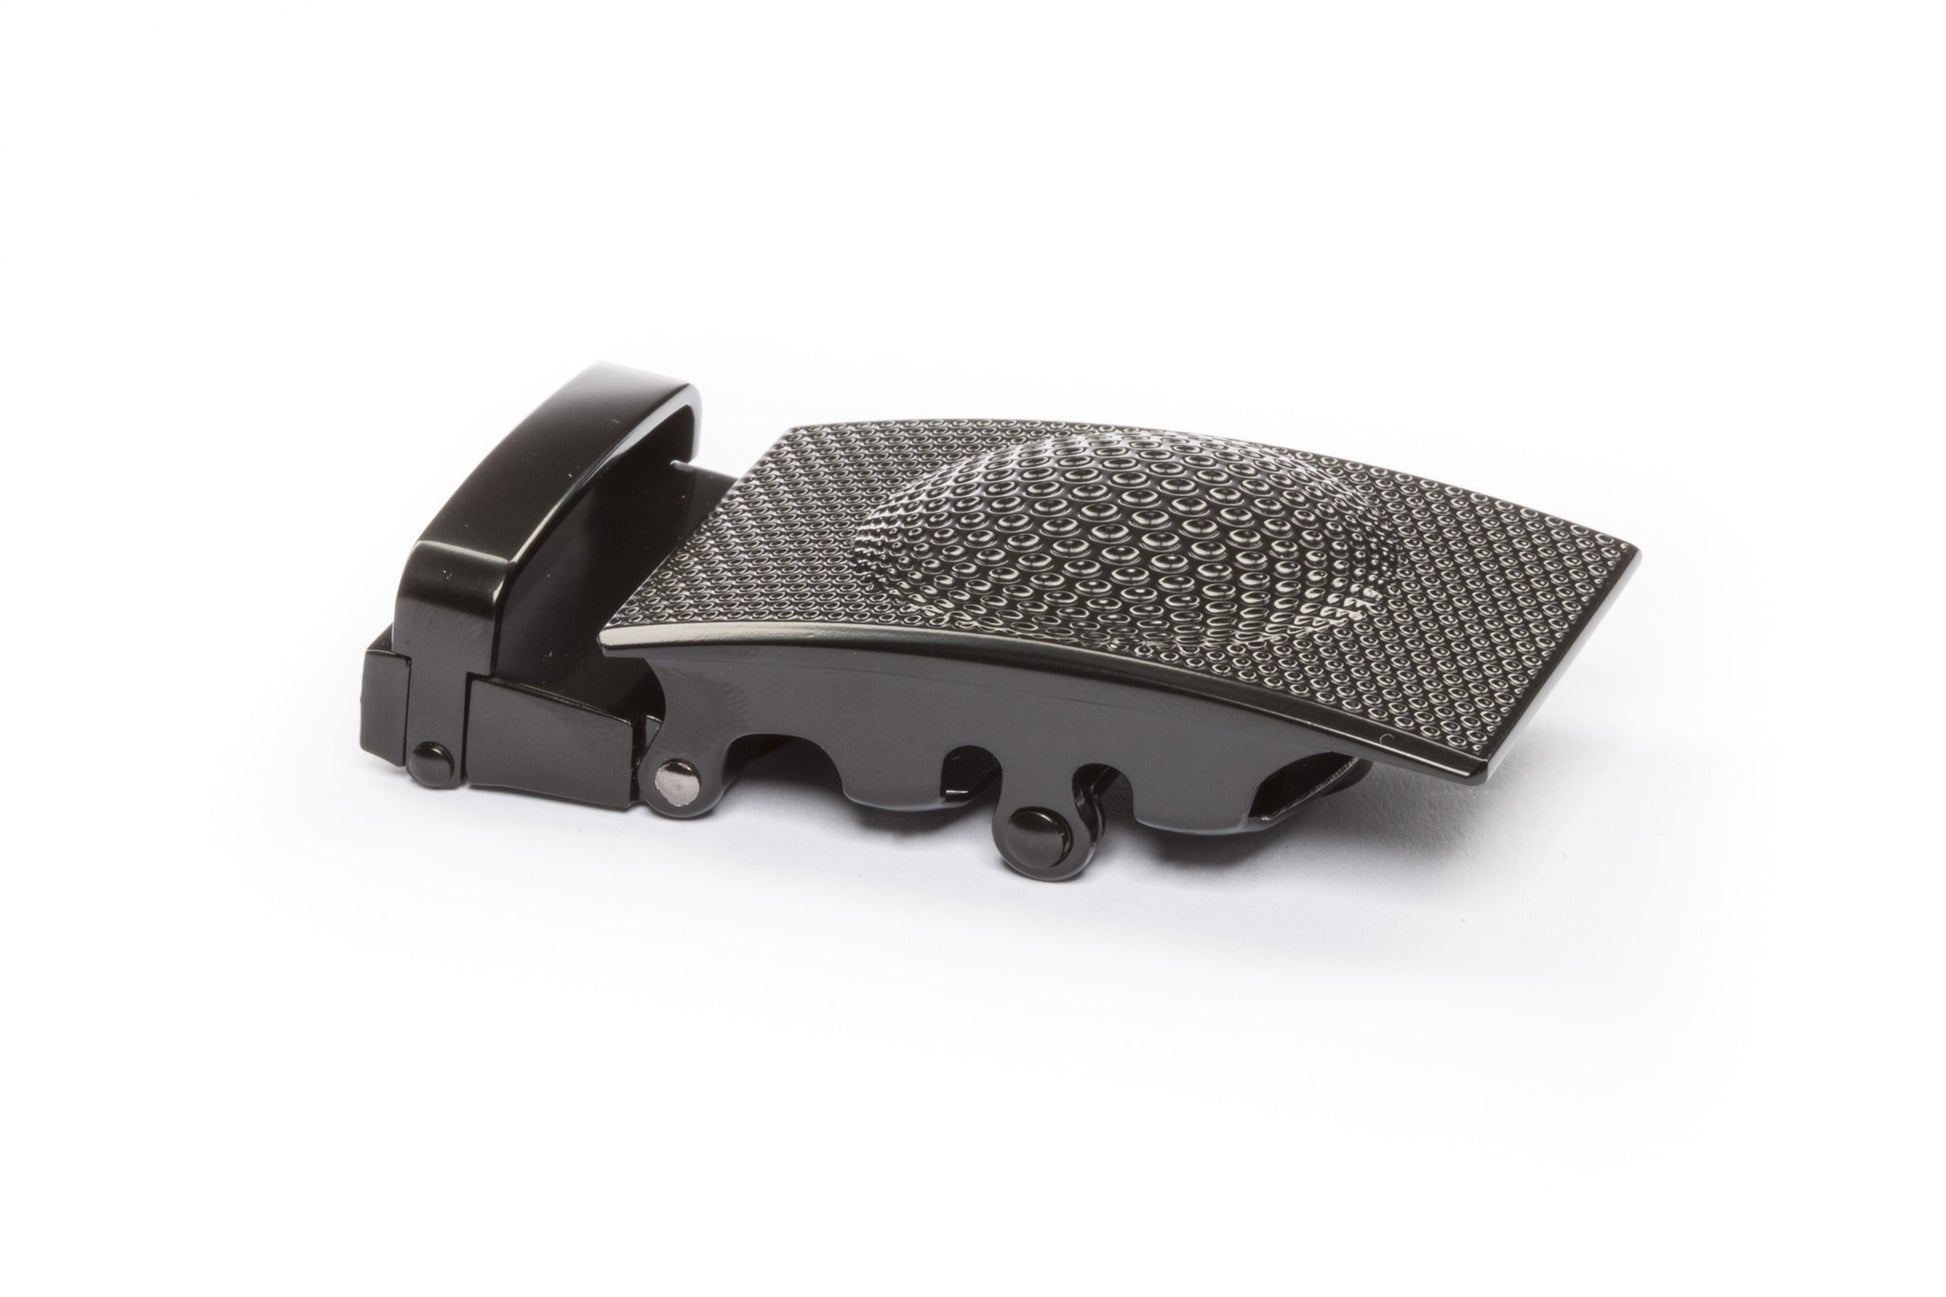 Men's golf ratchet belt buckle in black with a width of 1.5 inches, right side view.